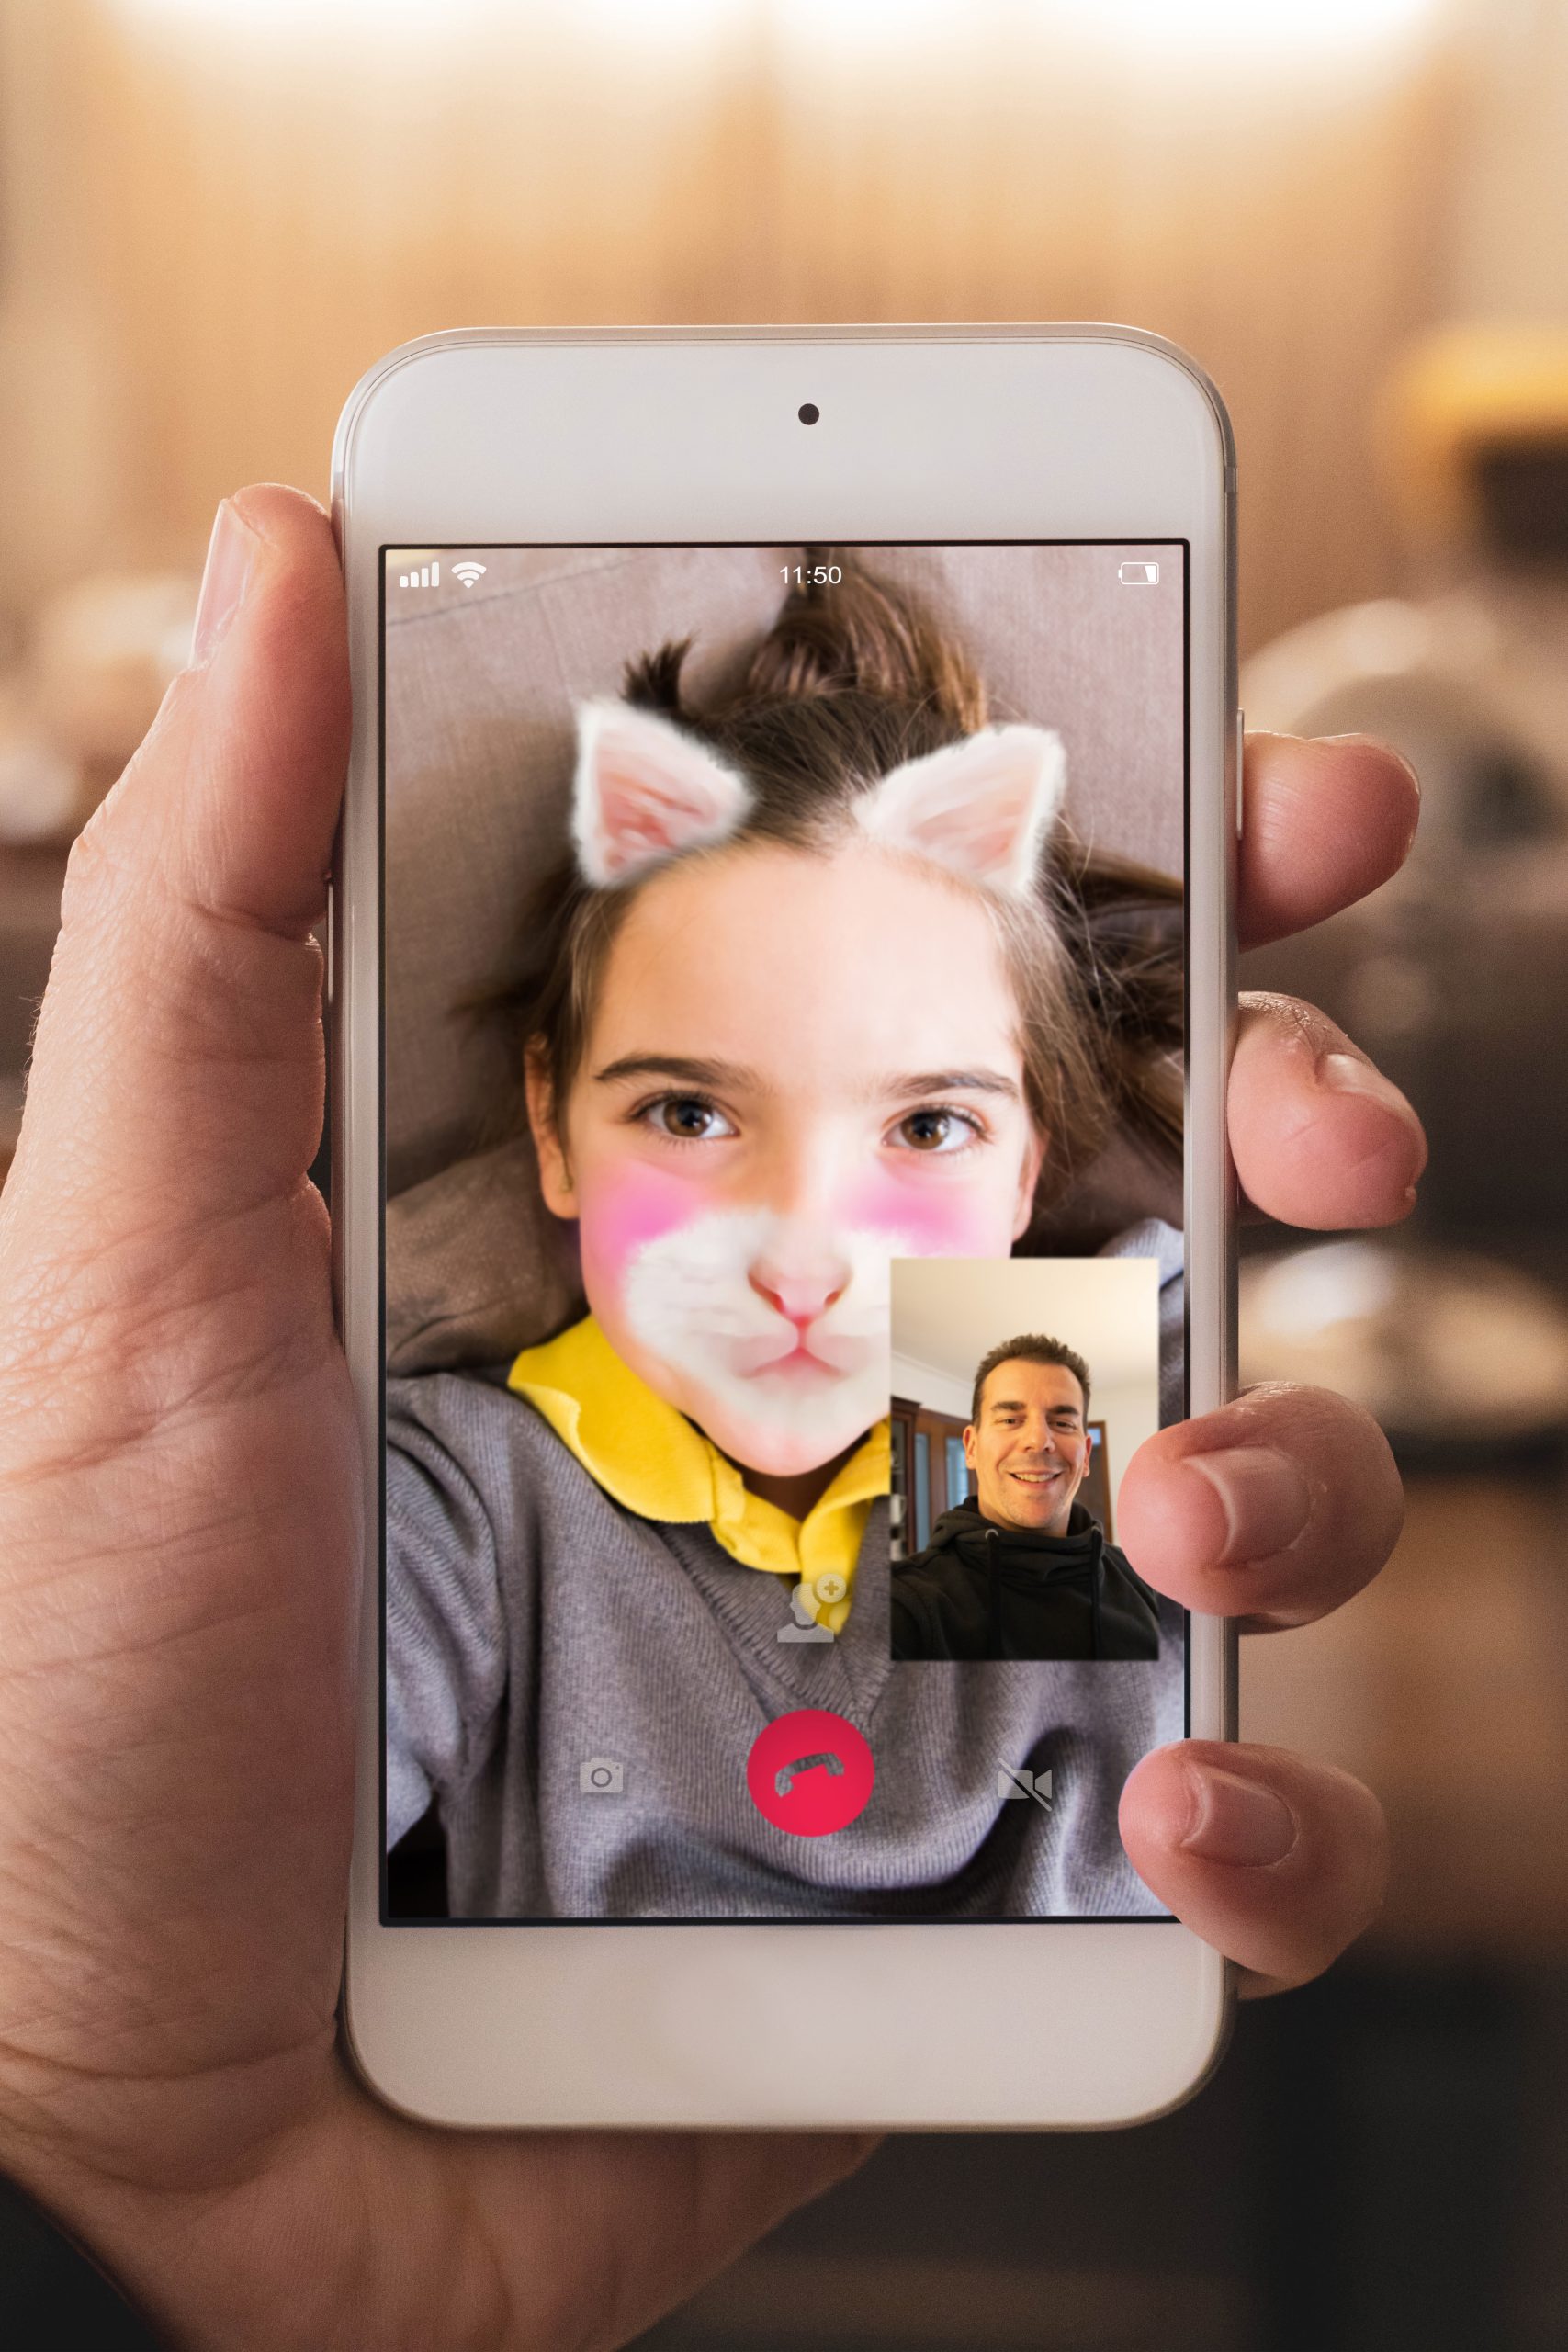 Doing Video Call From Personal Perspective With Niece And Funny Kitten Filter Face.